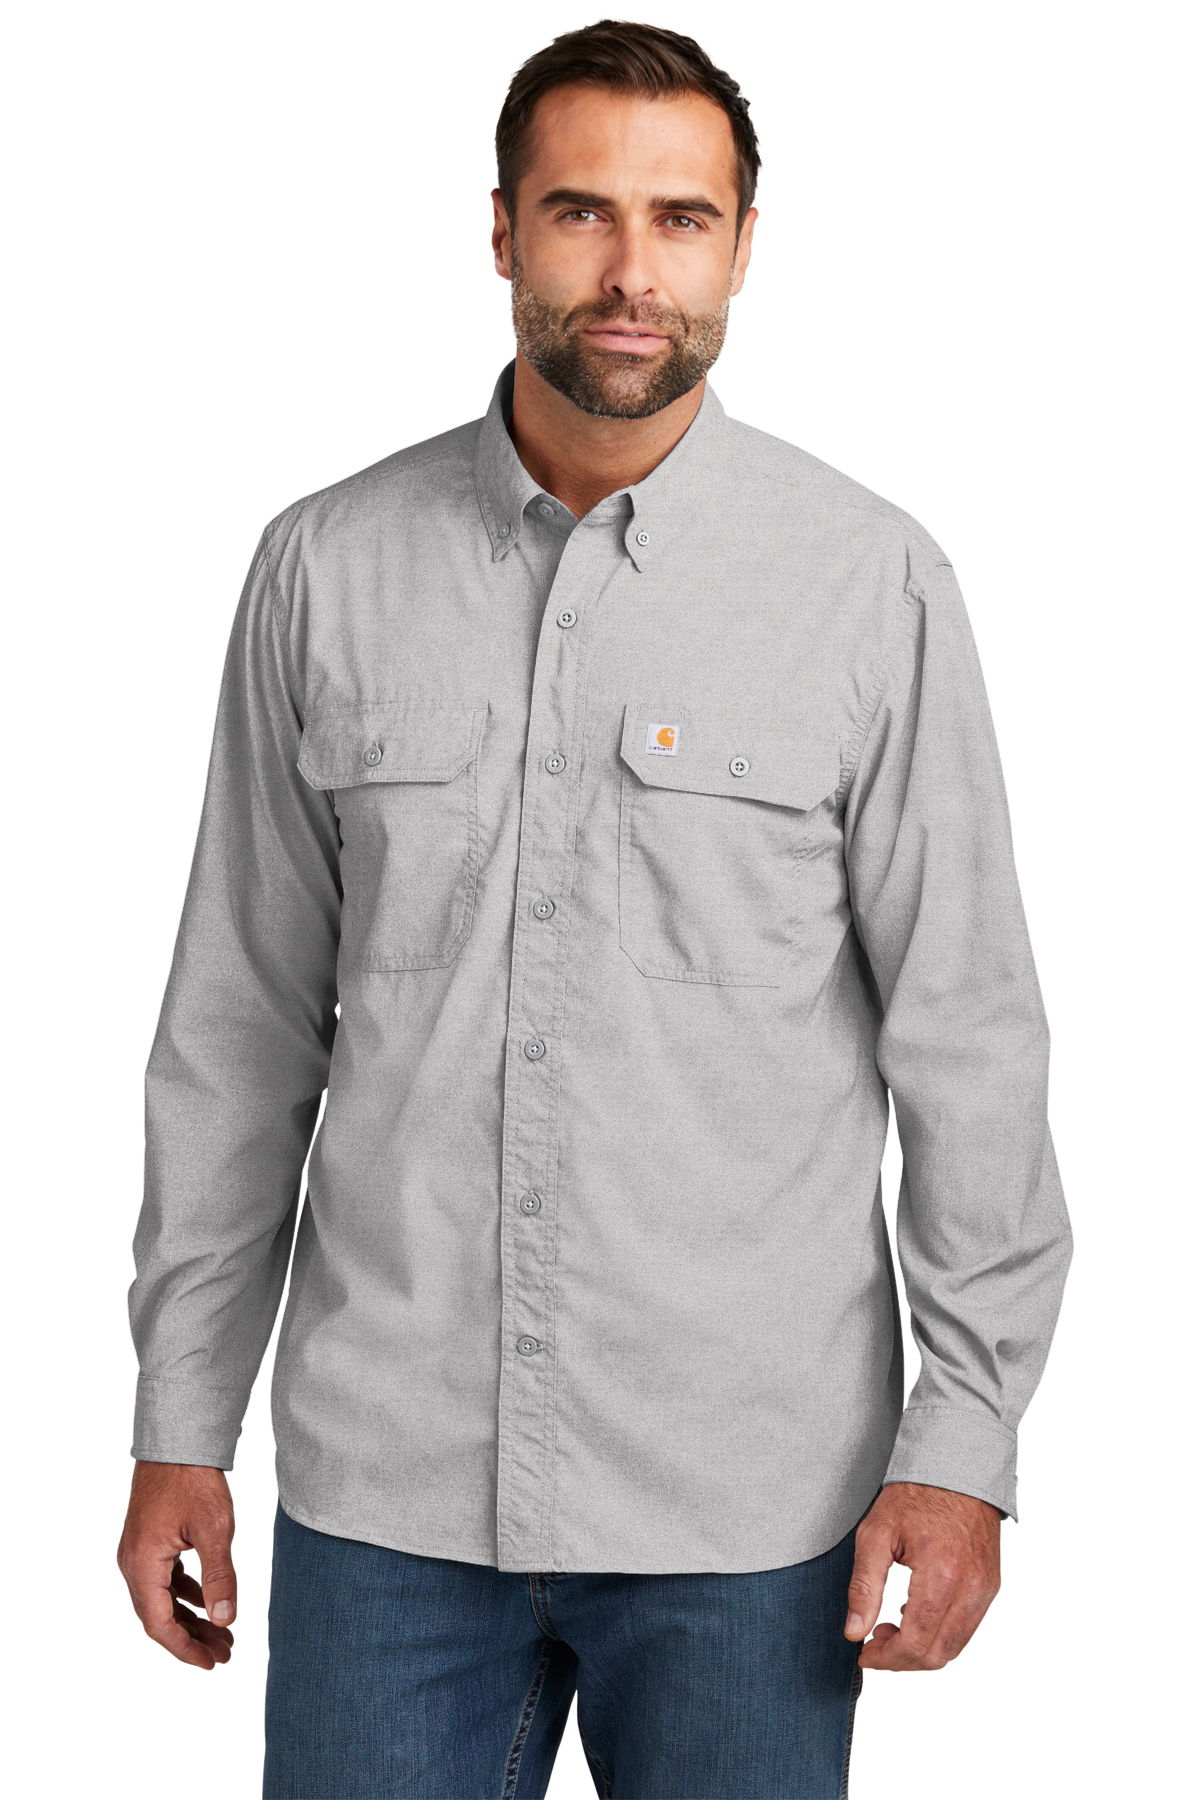 Button Down Fishing Shirt - Limit Out Supply Co.